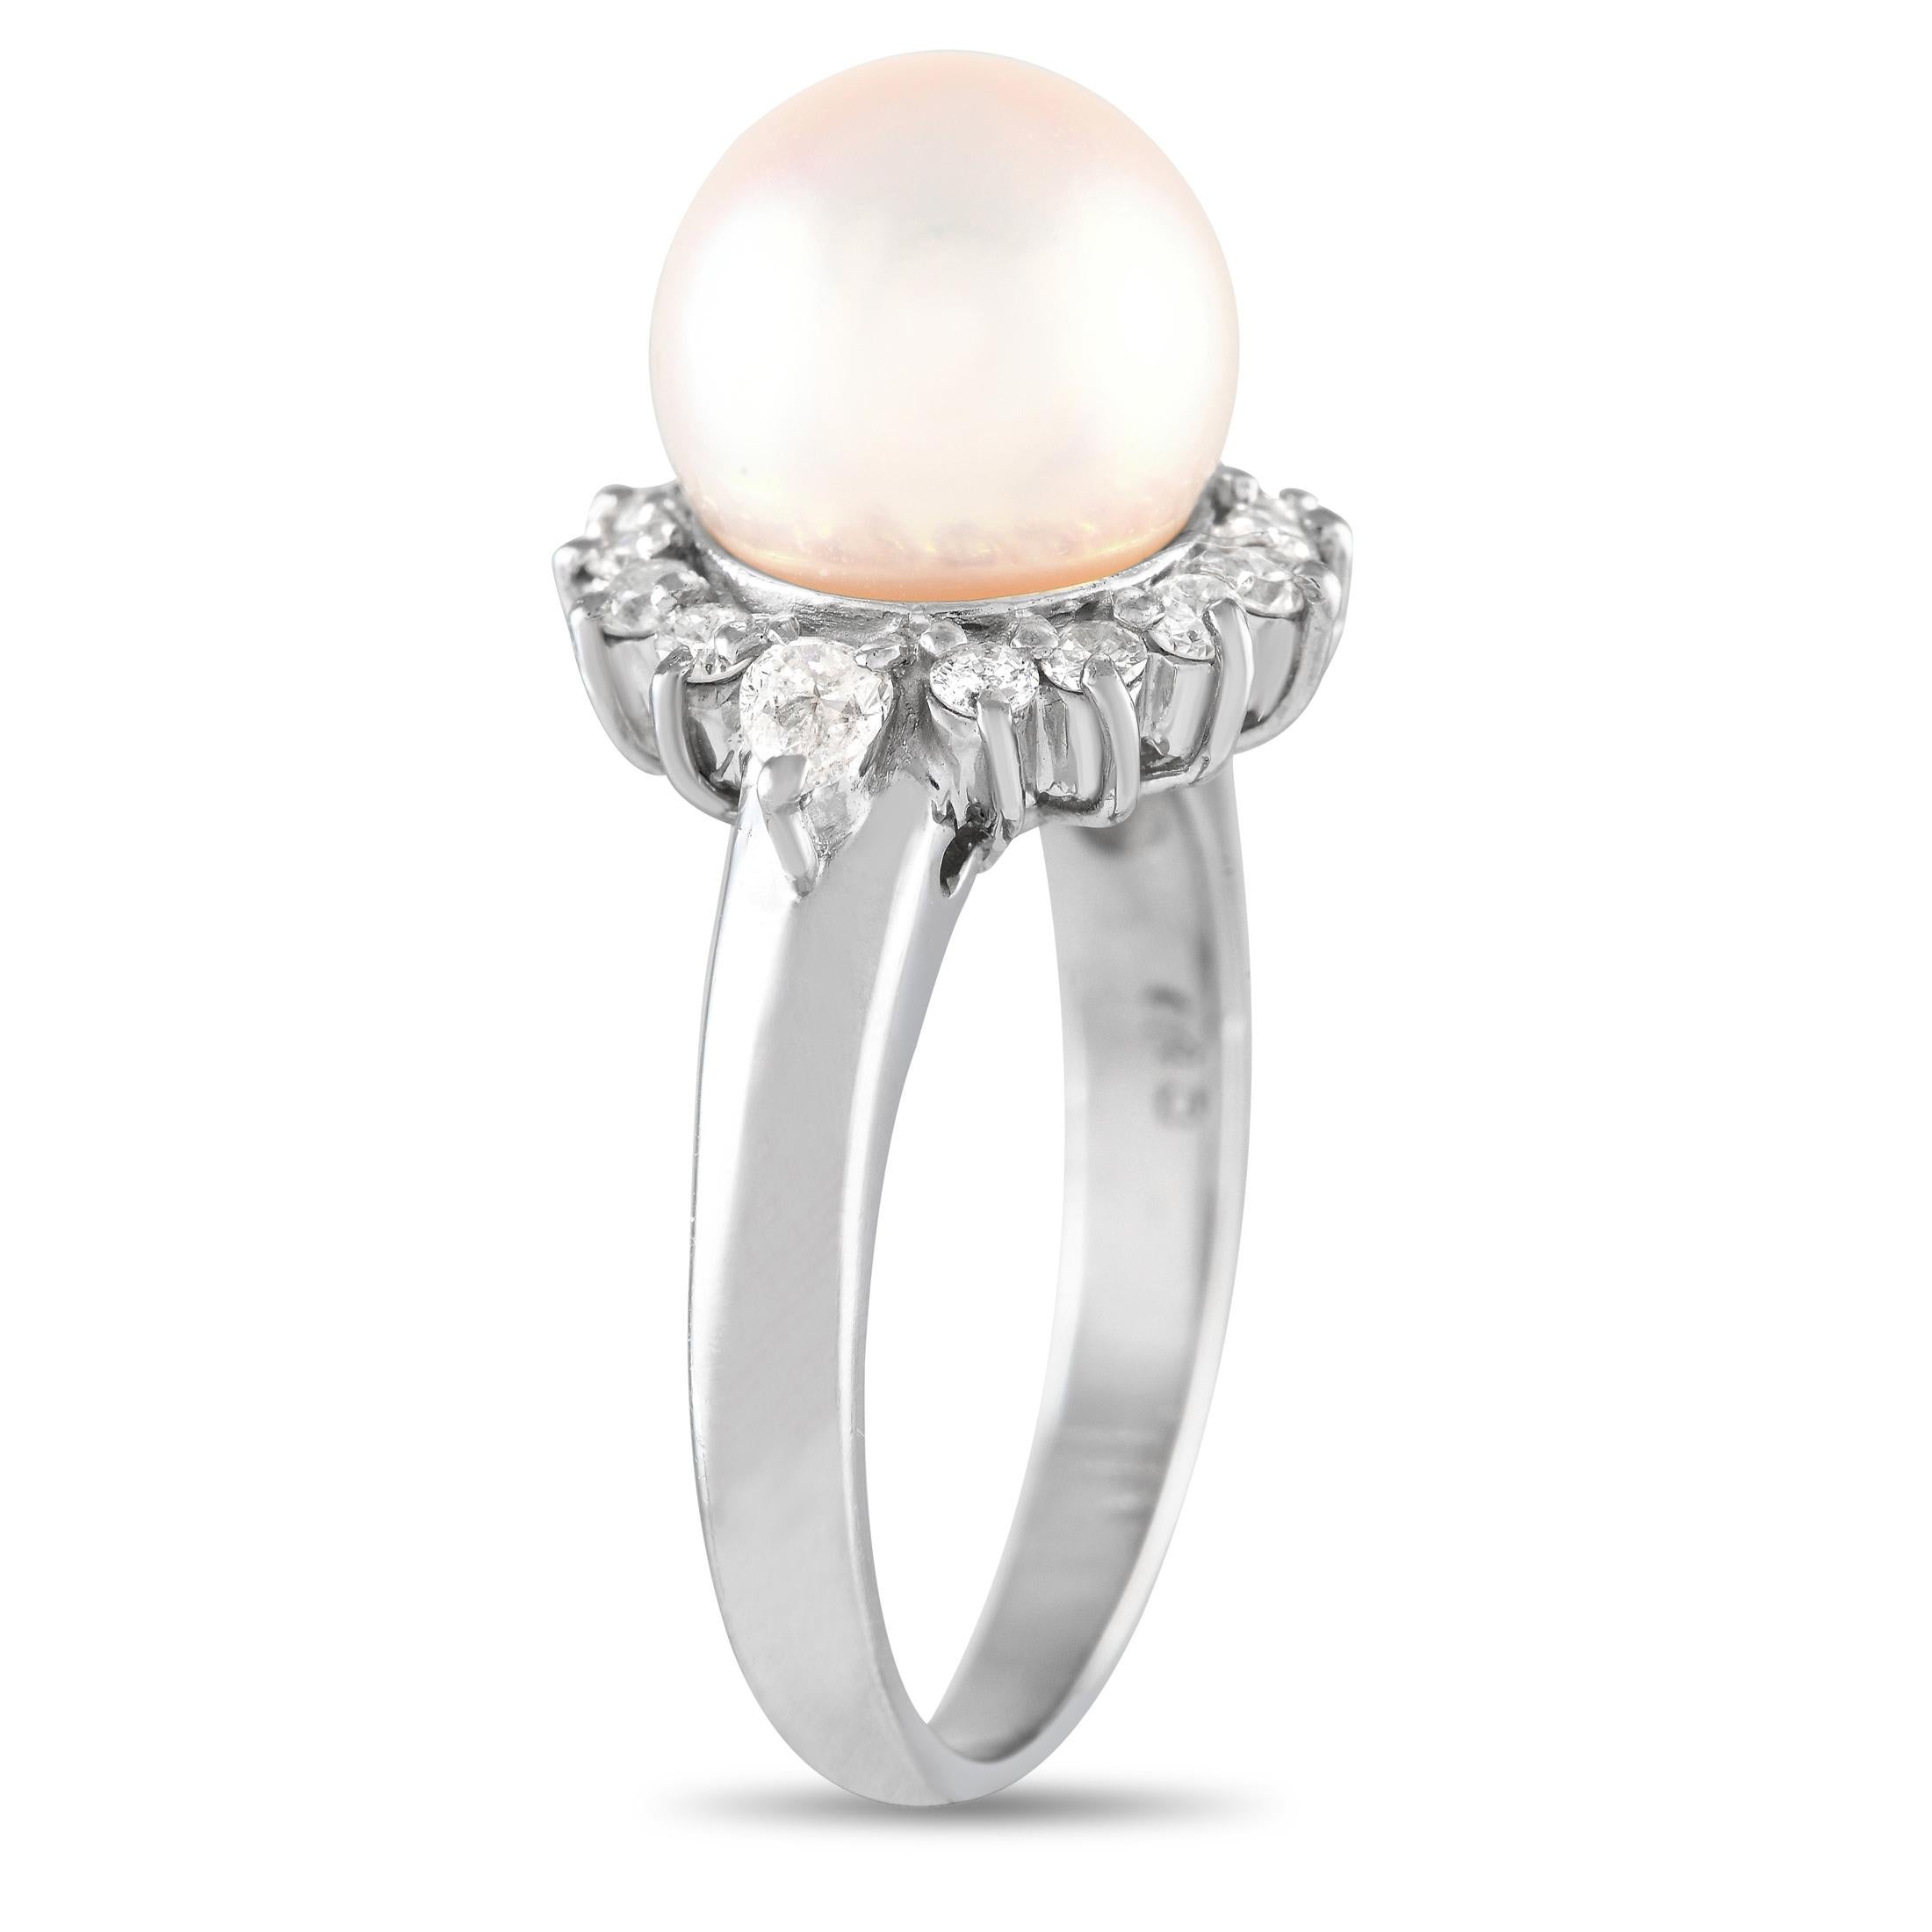 There's something about the enchanting refinement of this diamond and pearl ring. It features a polished platinum band topped with a 9-mm pearl surrounded by a sunburst halo of round diamonds. A pair of pear-cut diamonds flank the bright white gem,